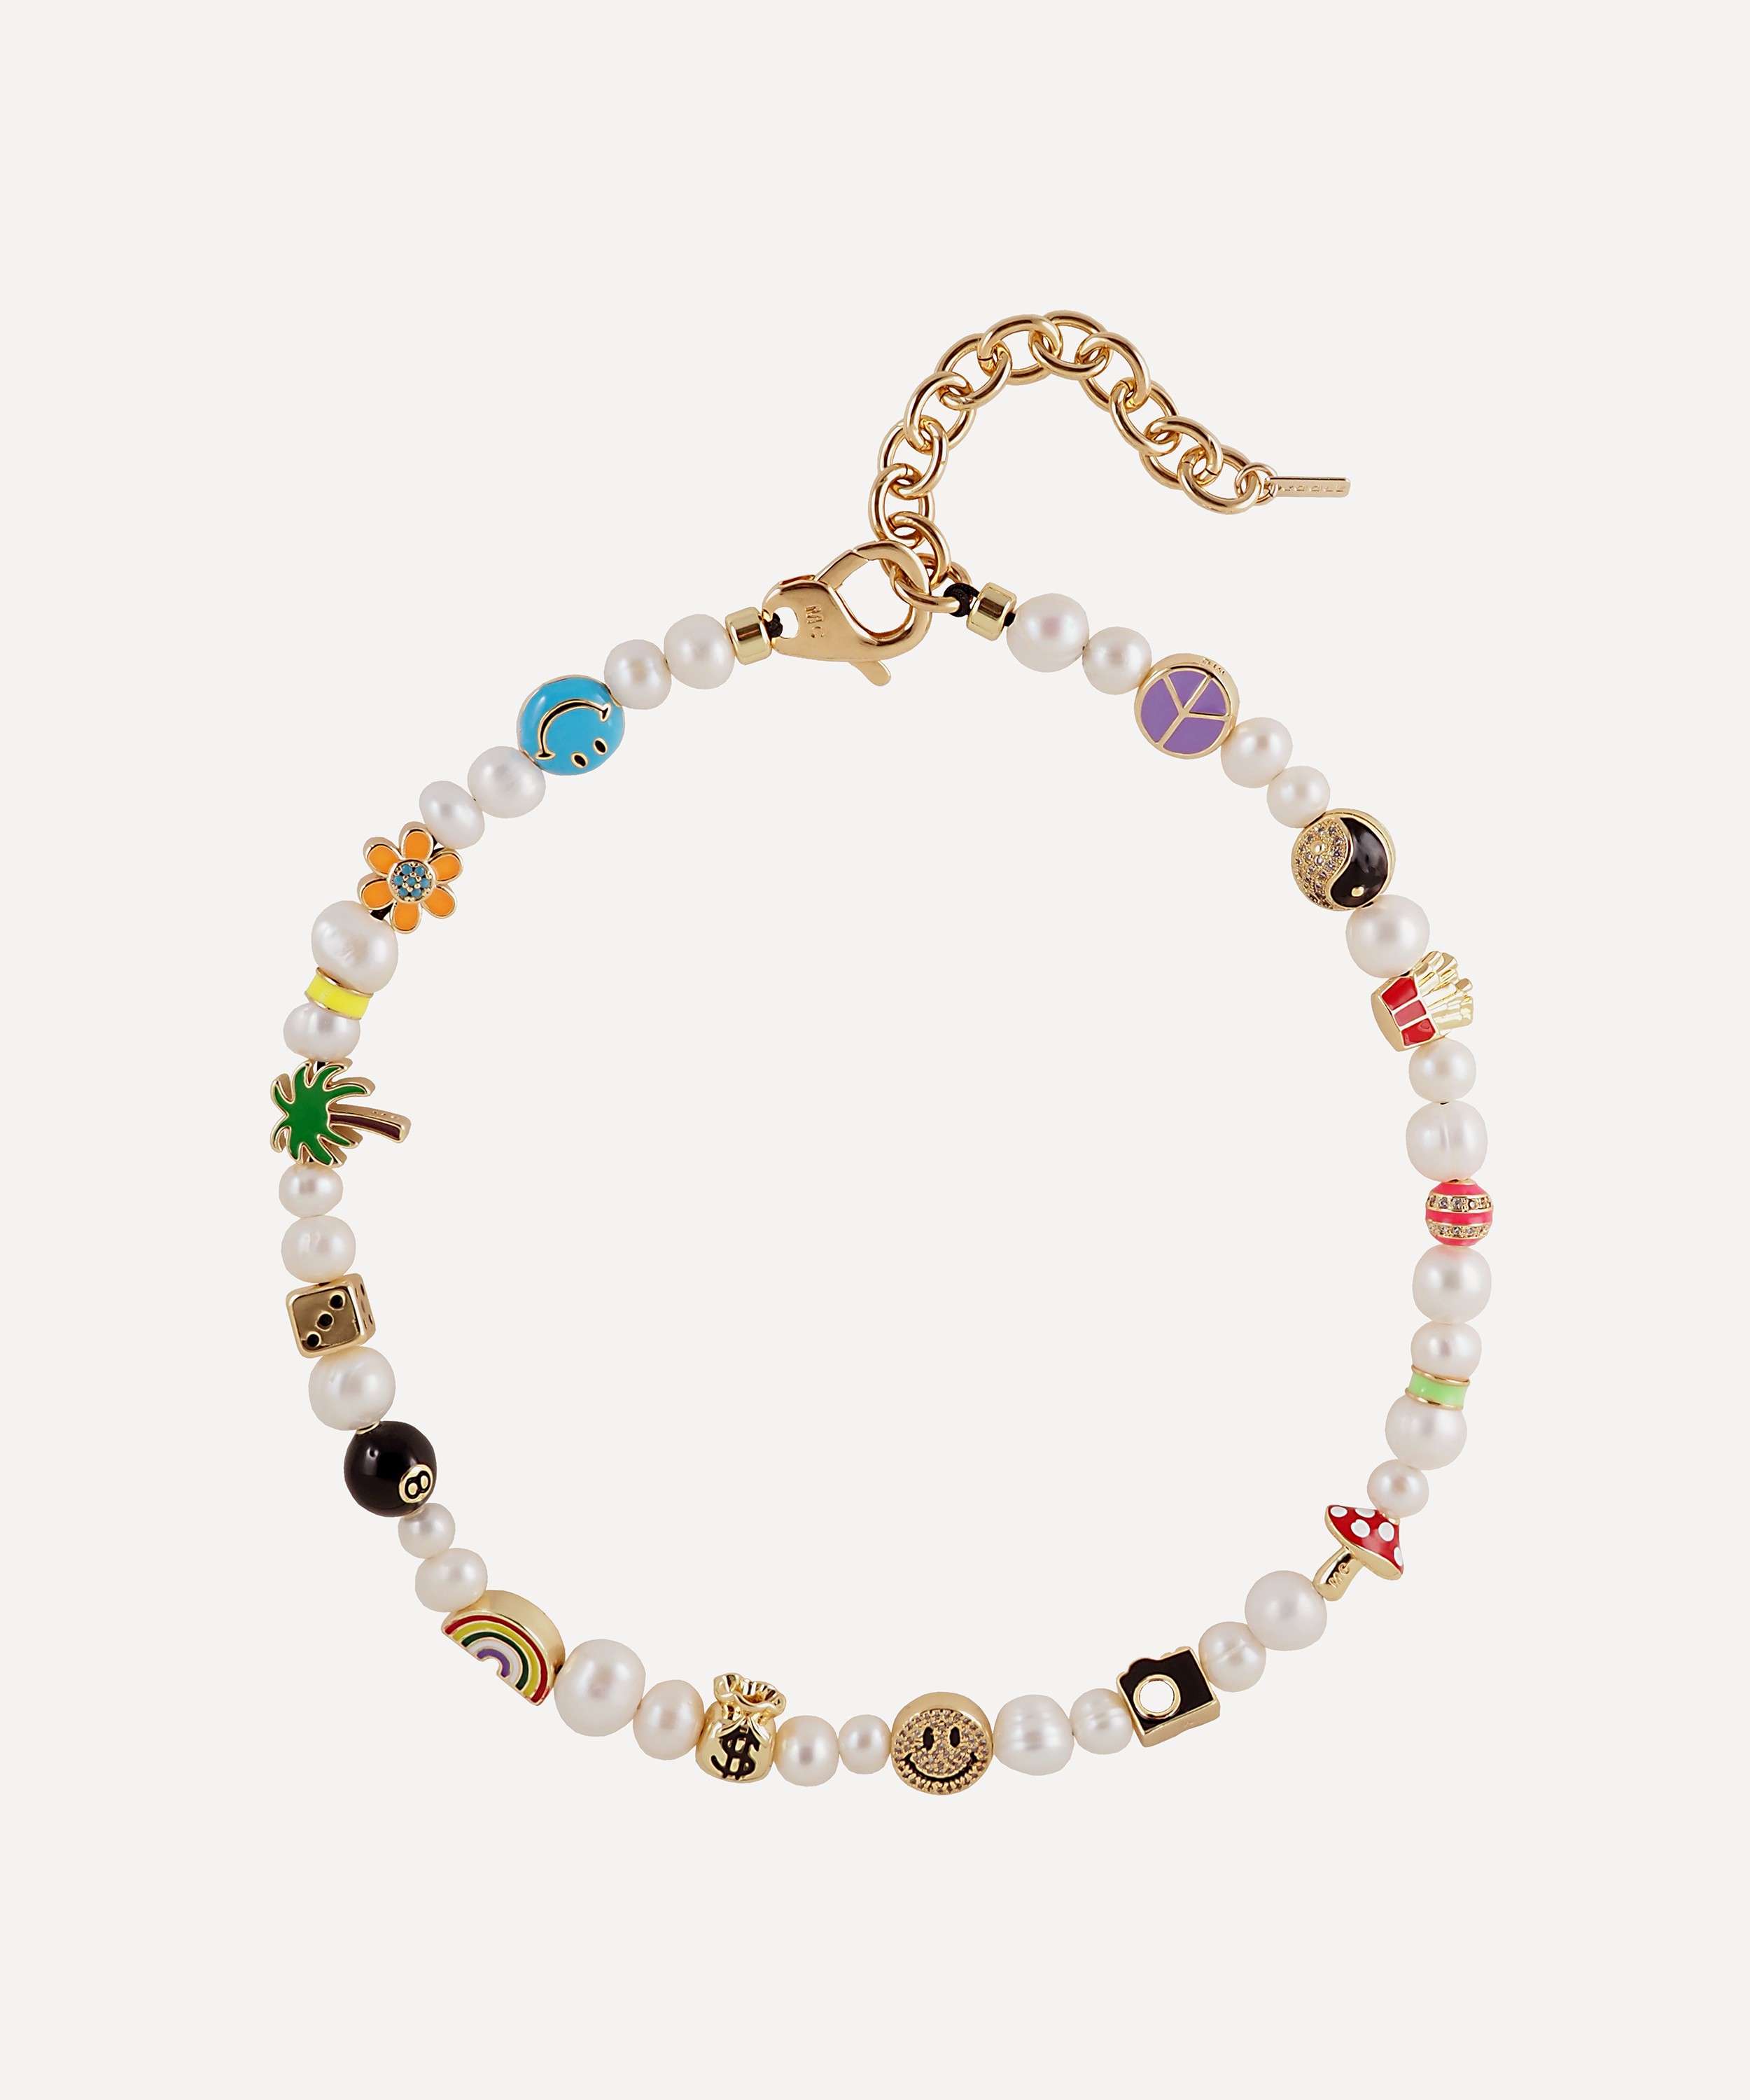 Martha Calvo - 14ct Gold-Plated Famous Enamel Charms and Pearl Necklace